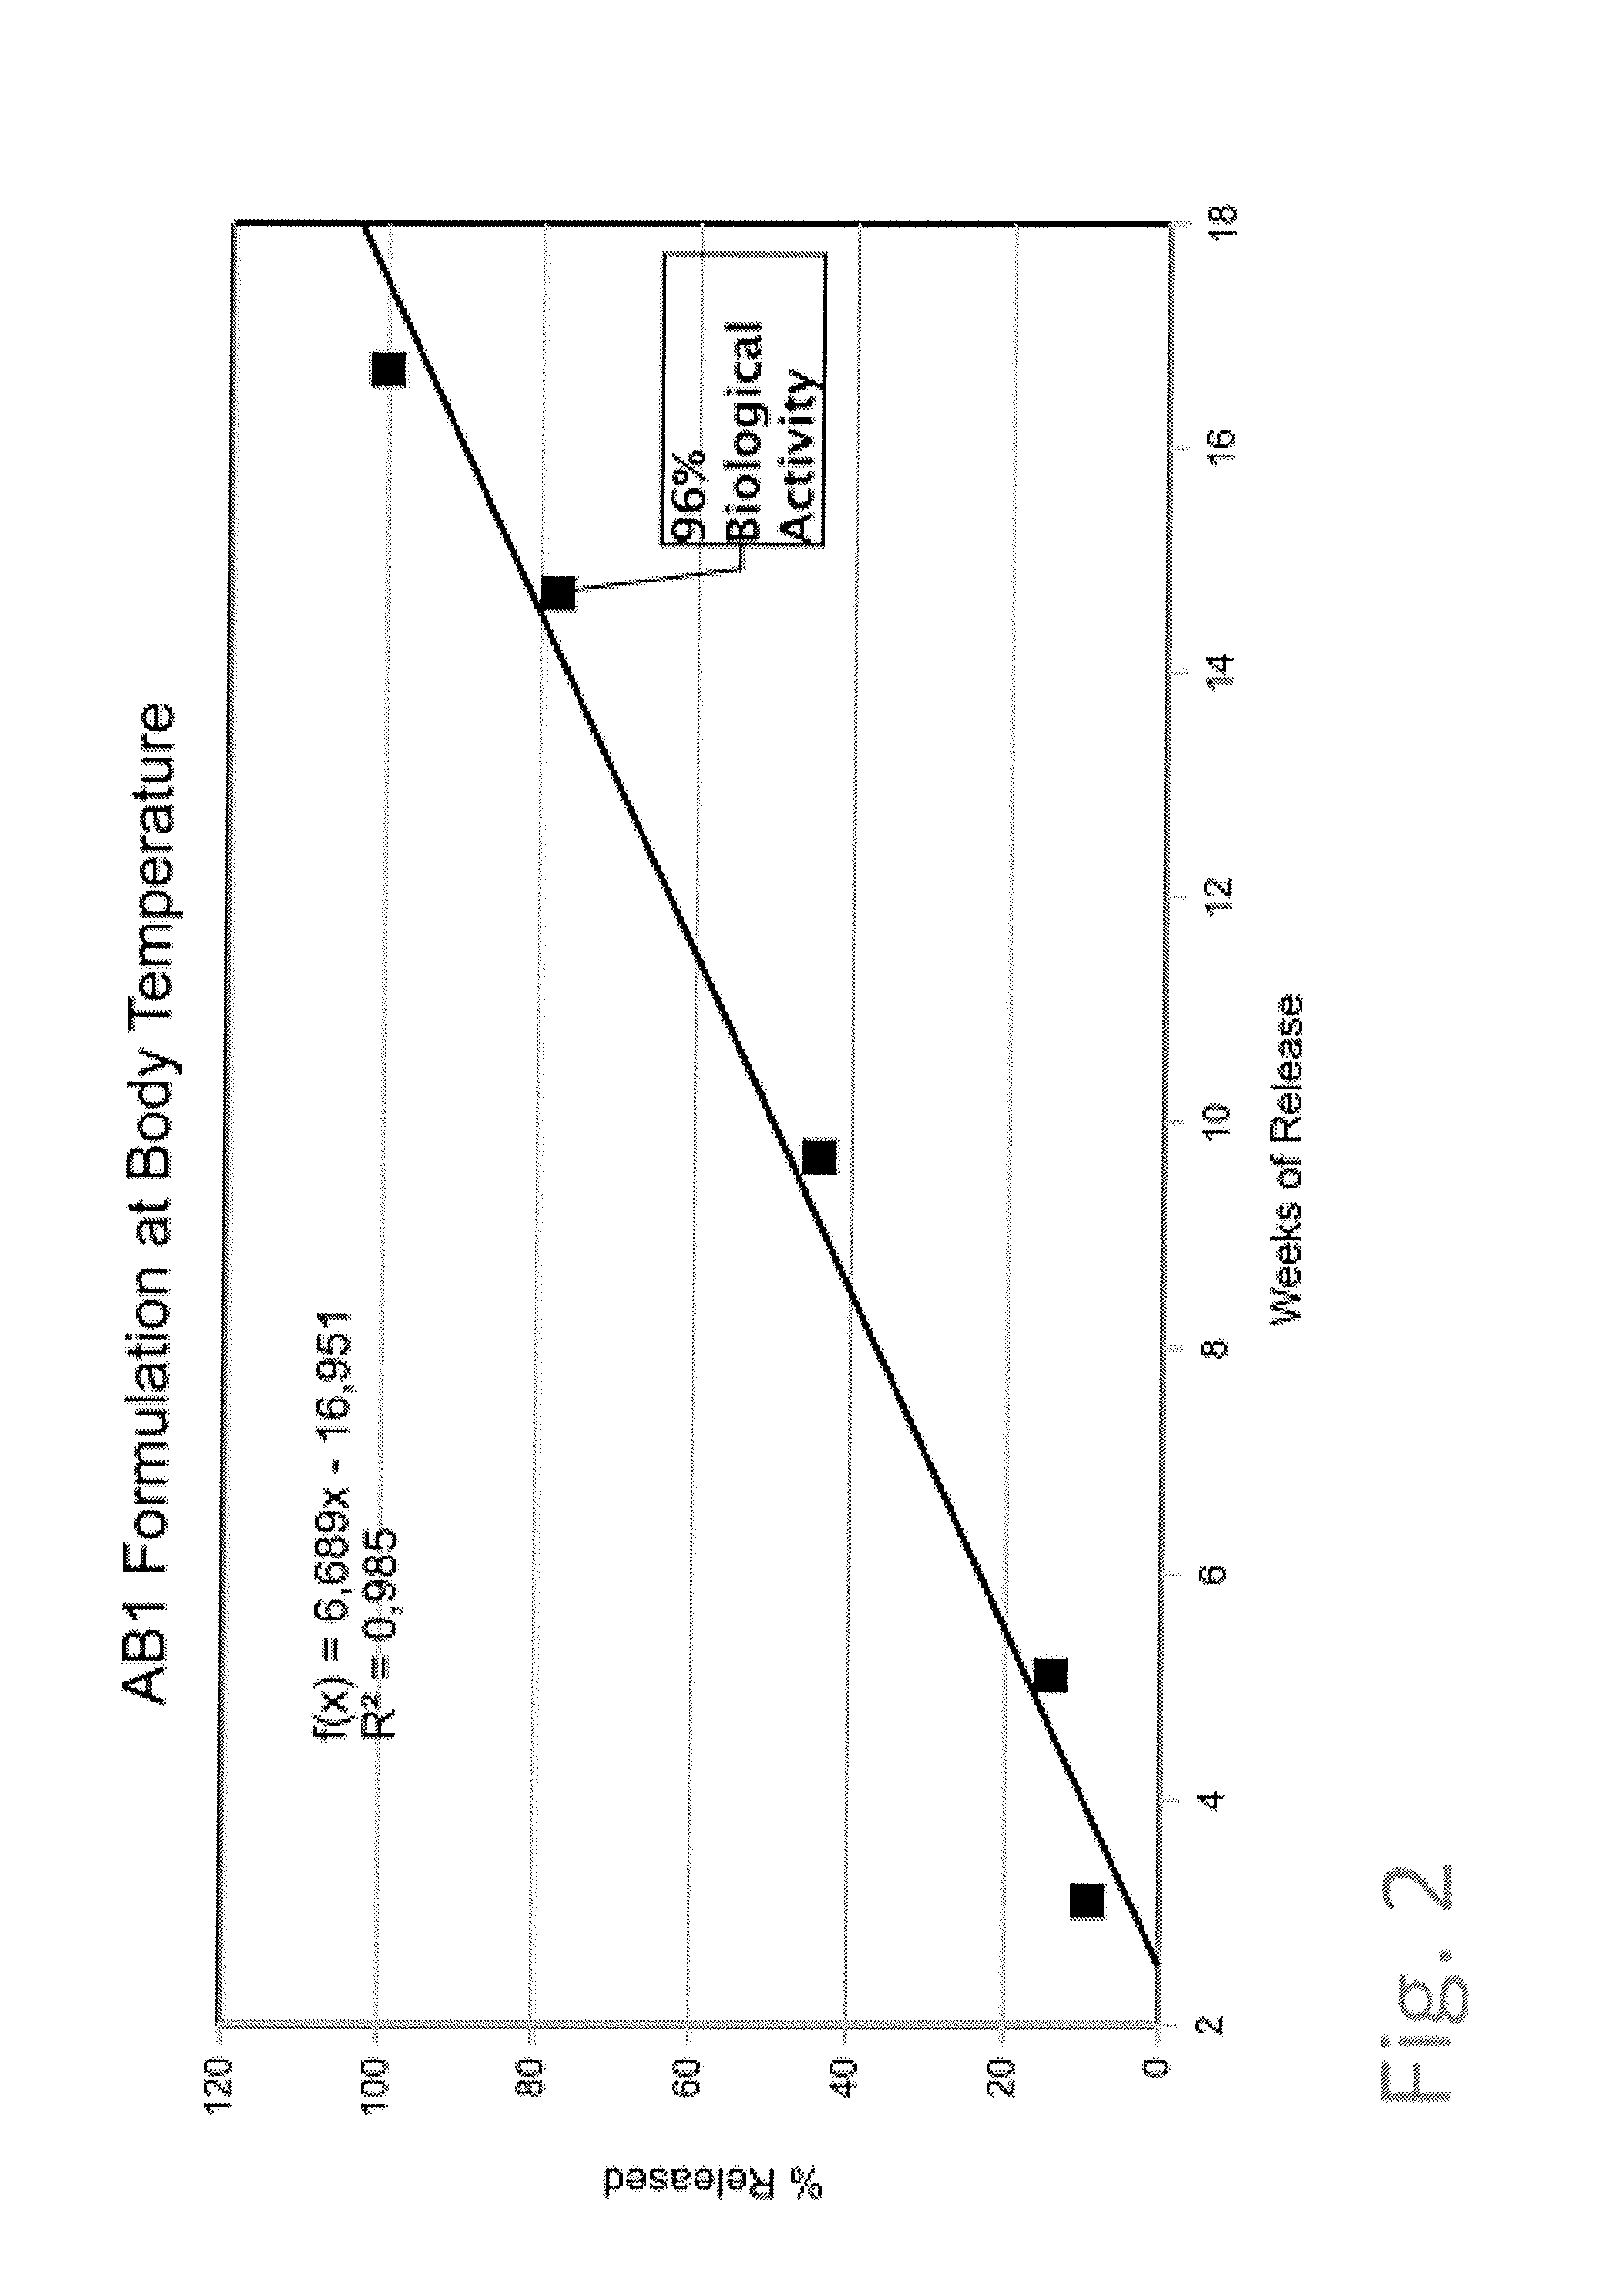 Hydrophobic drug-delivery material, method for manufacturing thereof and methods for delivery of a drug-delivery composition